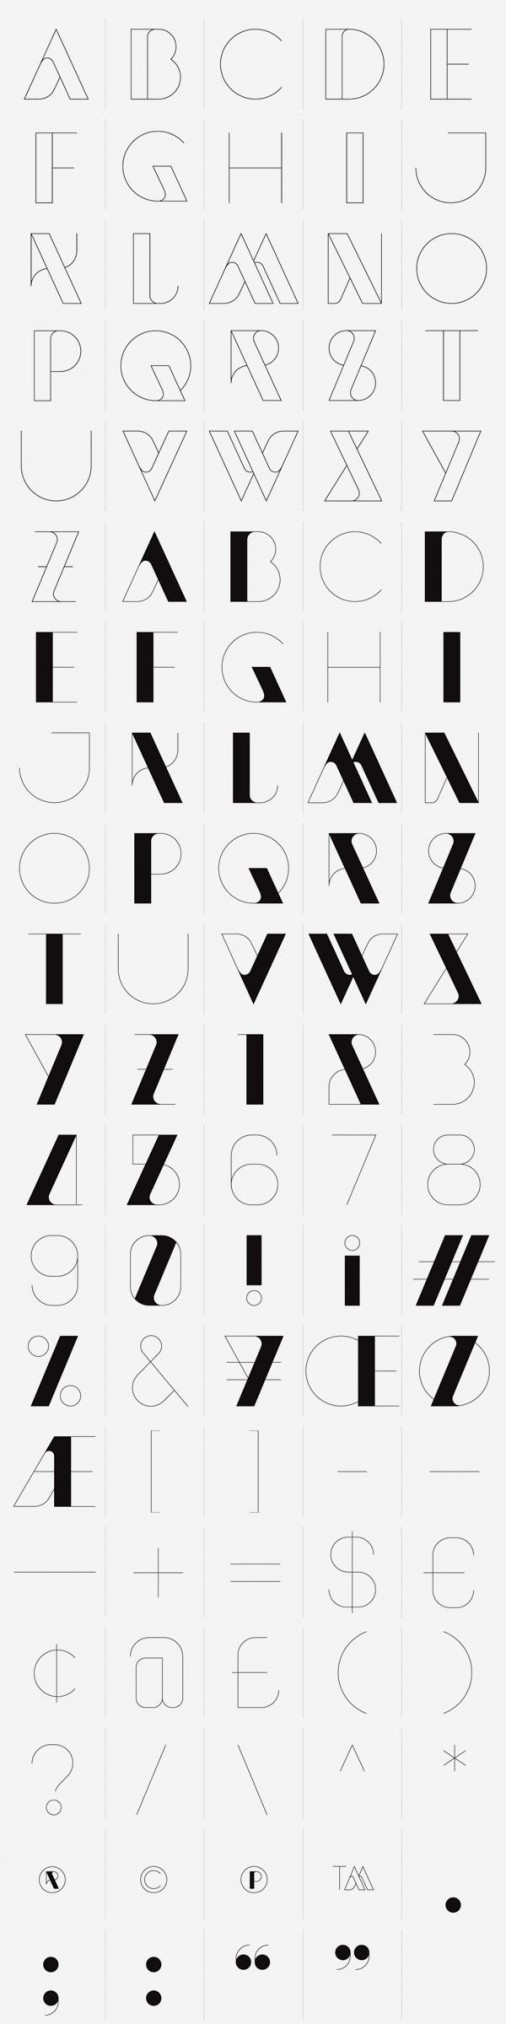 happy new year modern typeface